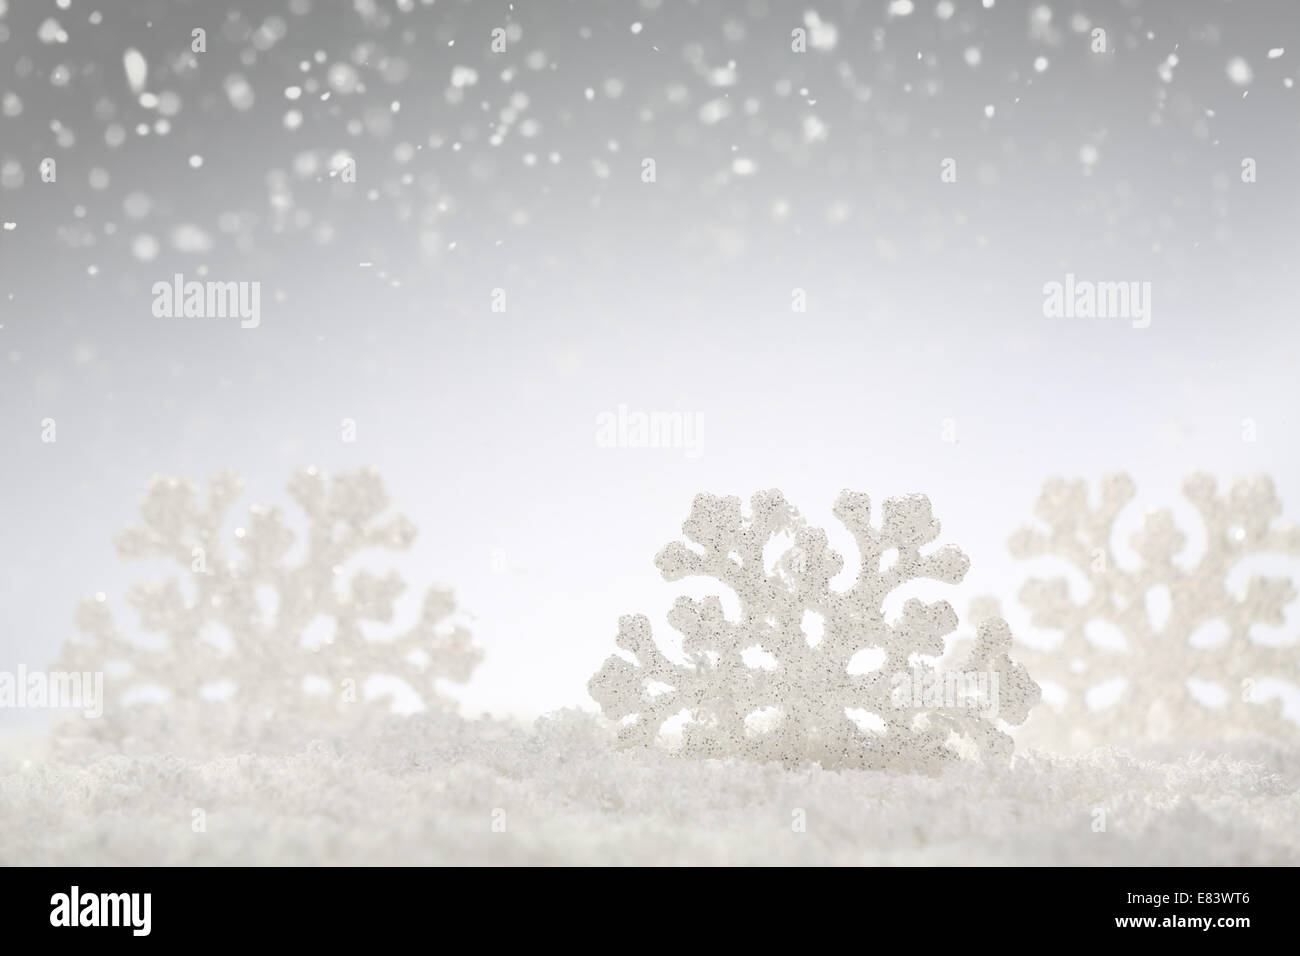 Christmas silver background with snowflakes Stock Photo